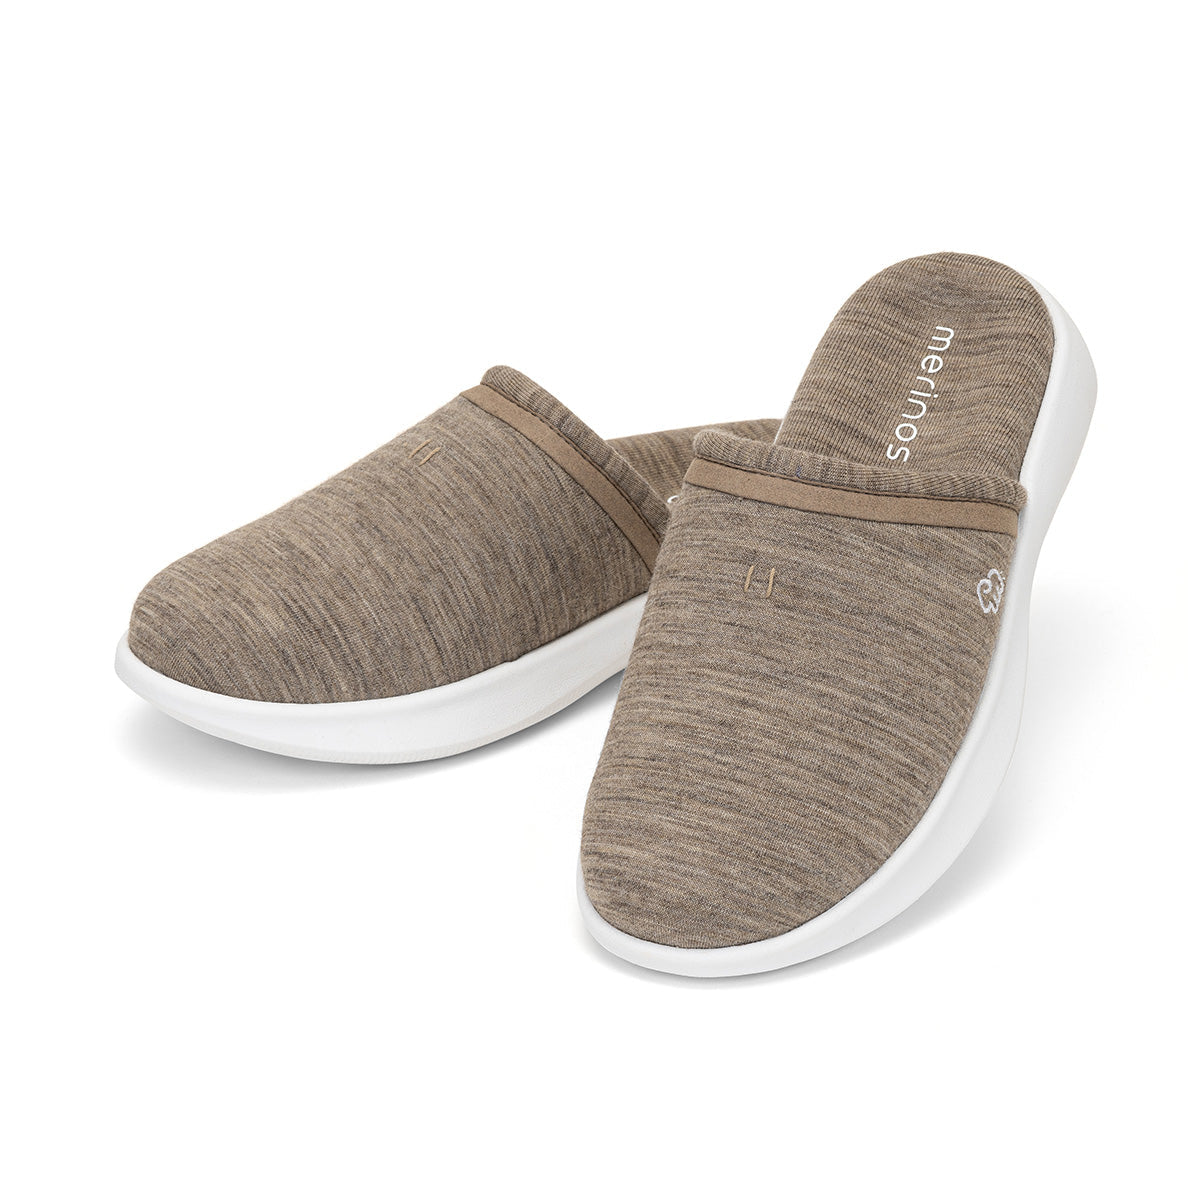 Women's Mules Sand - Special Offer